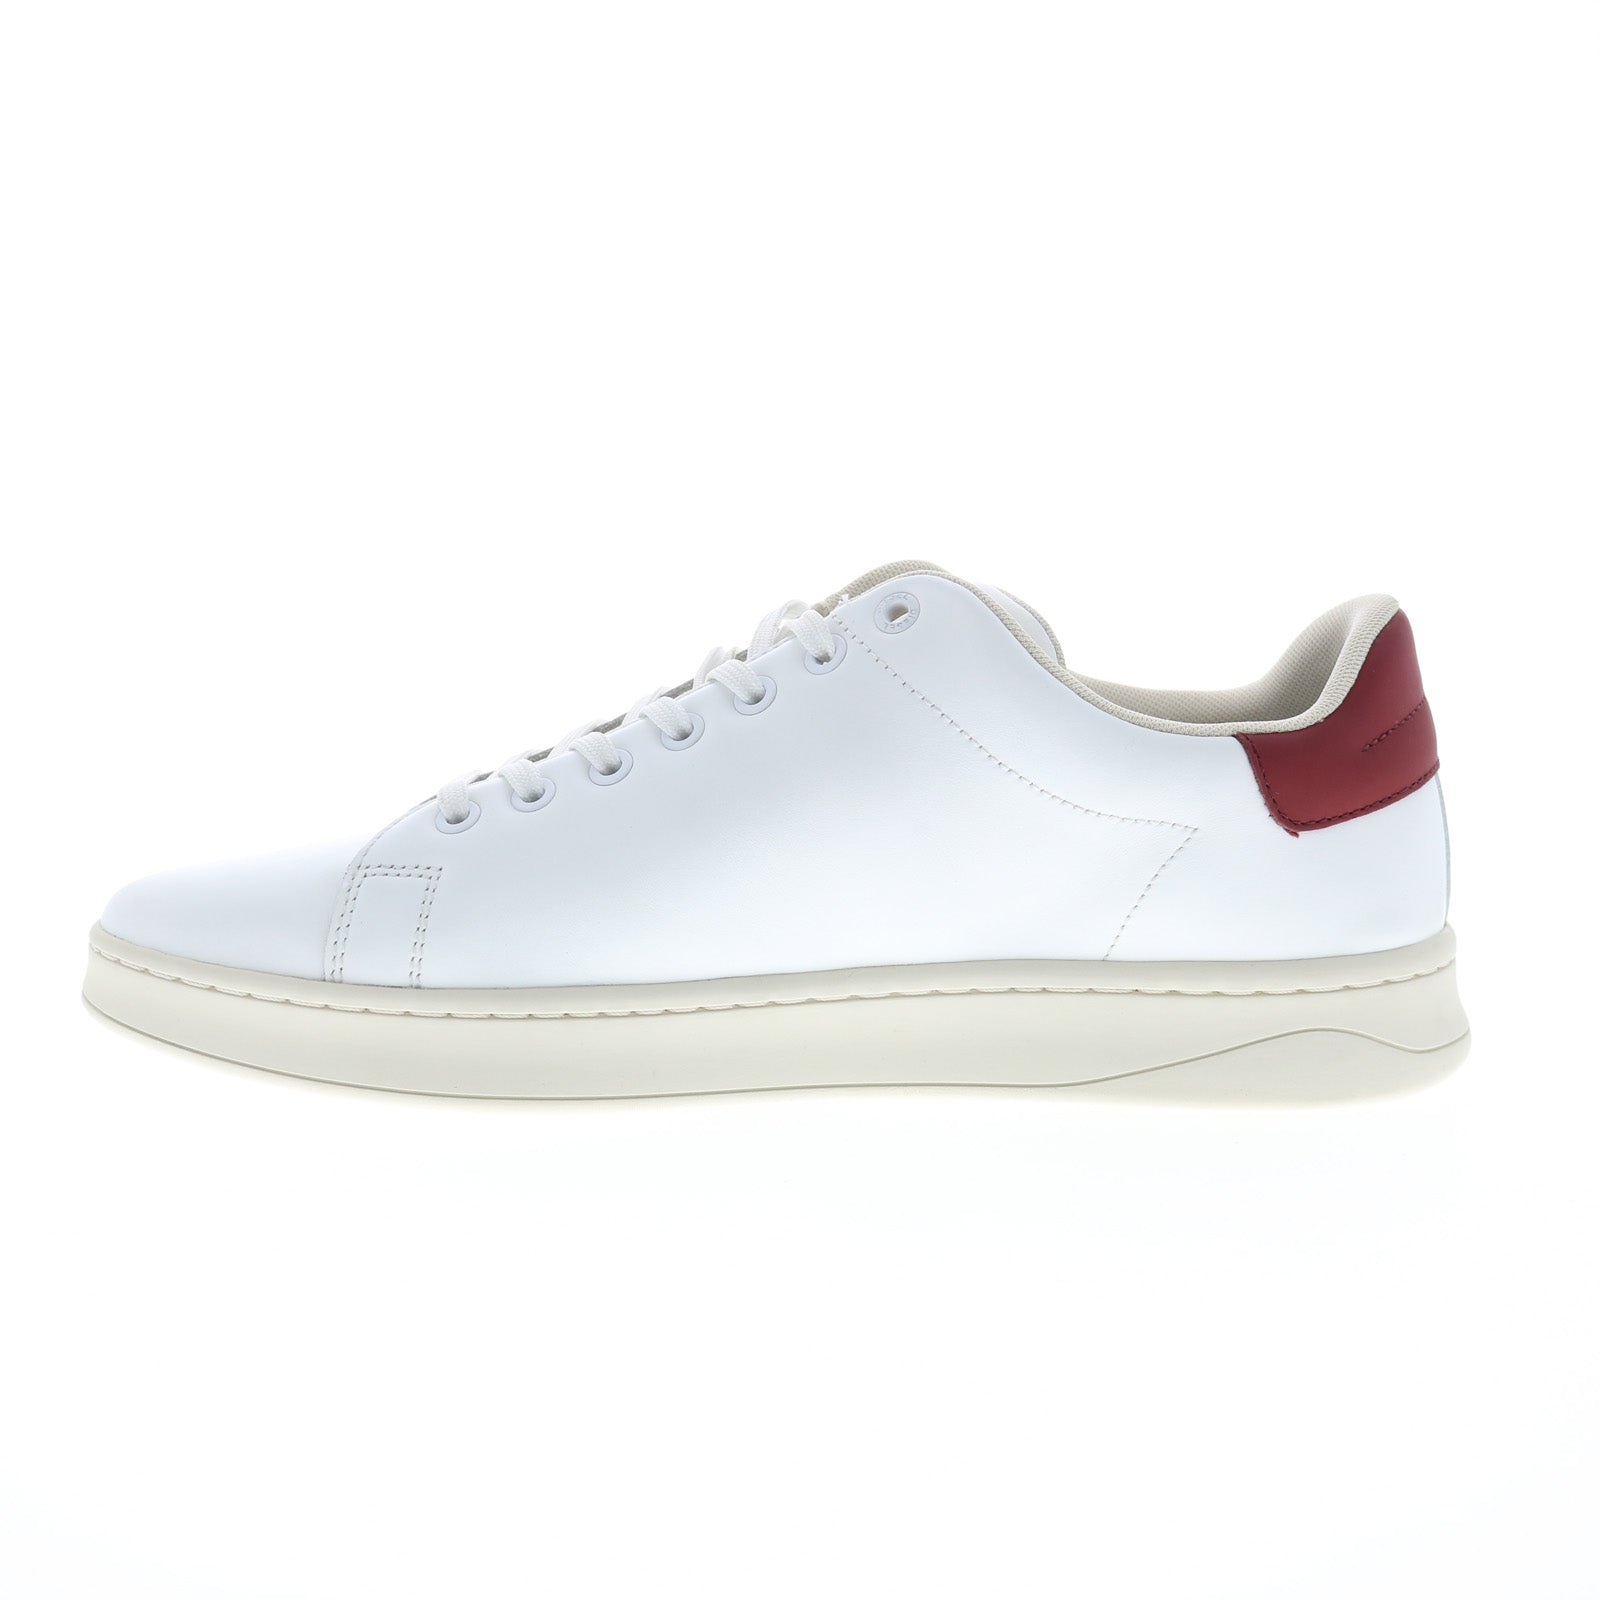 Diesel S-Athene Low Y02869-P4423-H9232 Mens White Sneakers Shoes